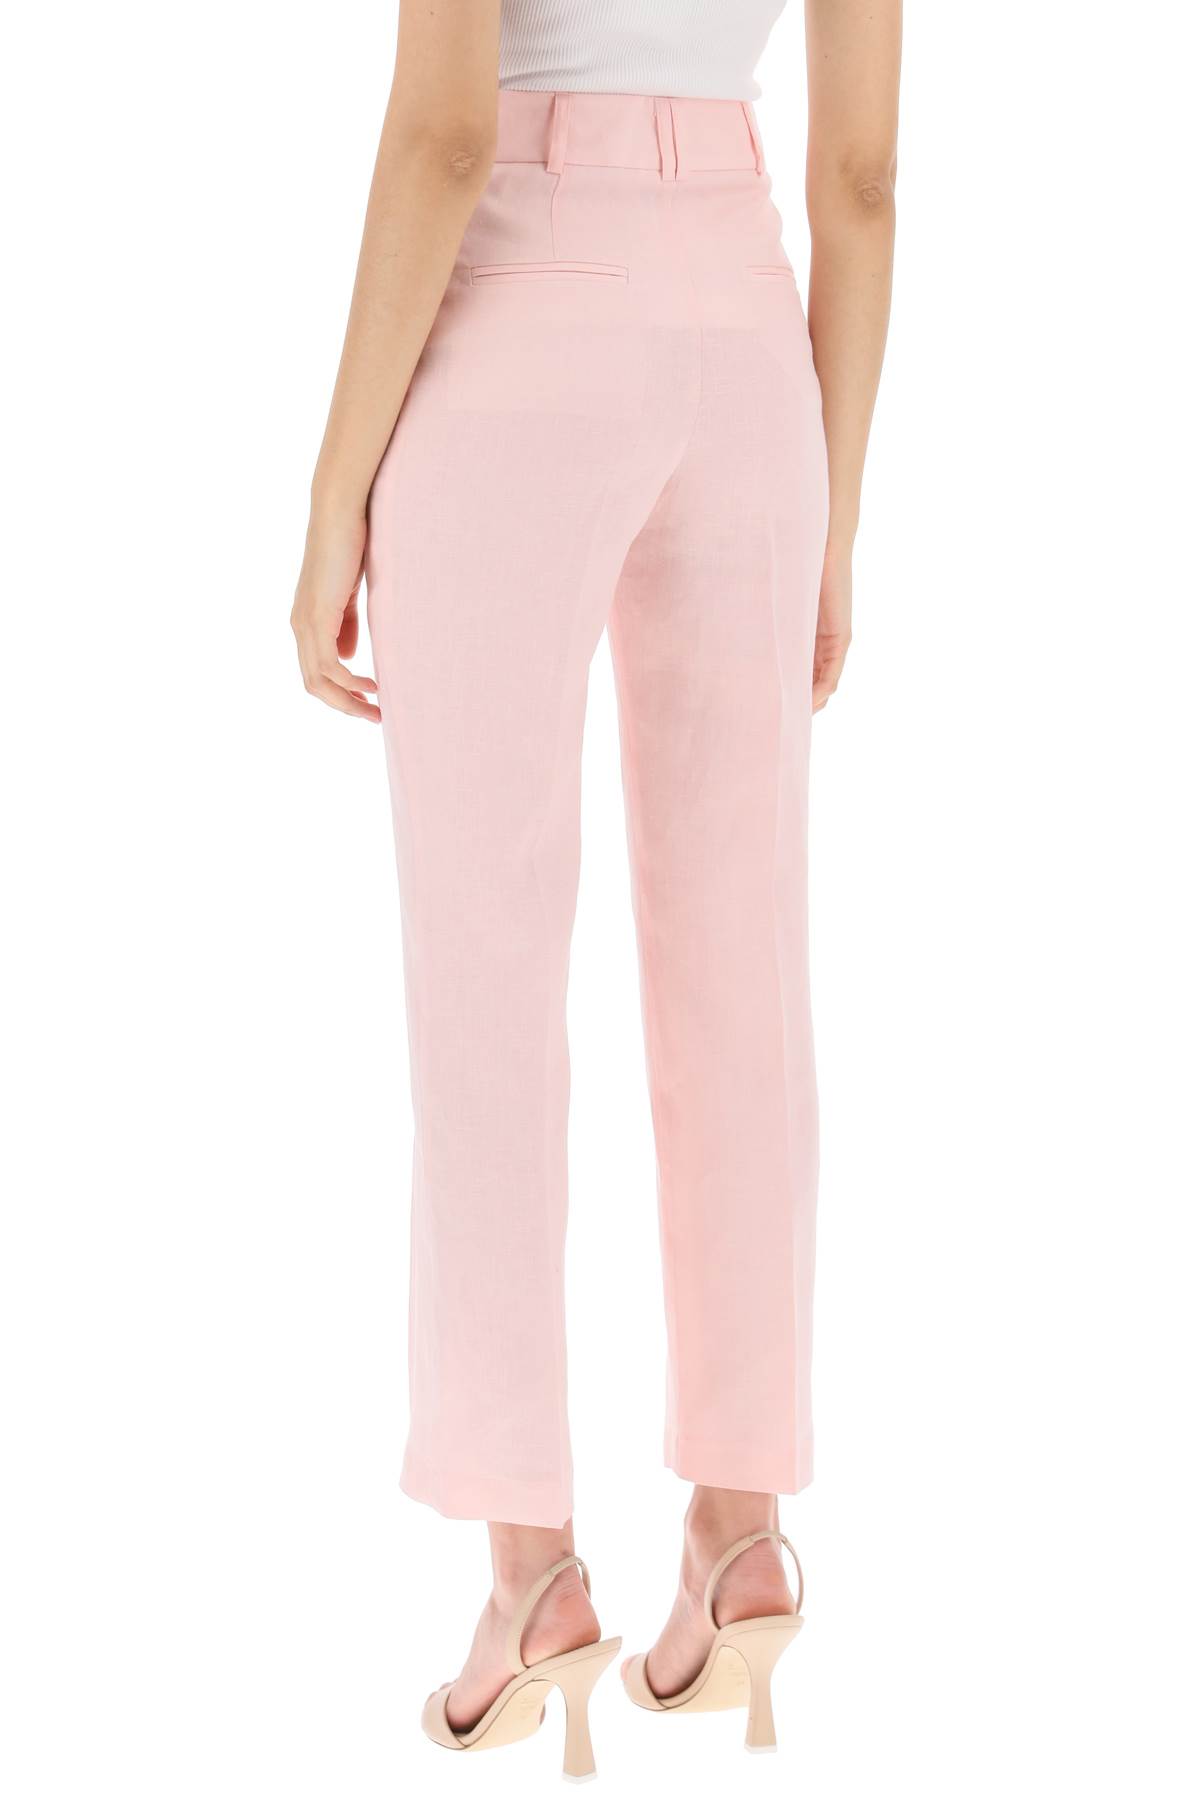 Shop Hebe Studio Loulou Linen Trousers In Pink Calypso (pink)